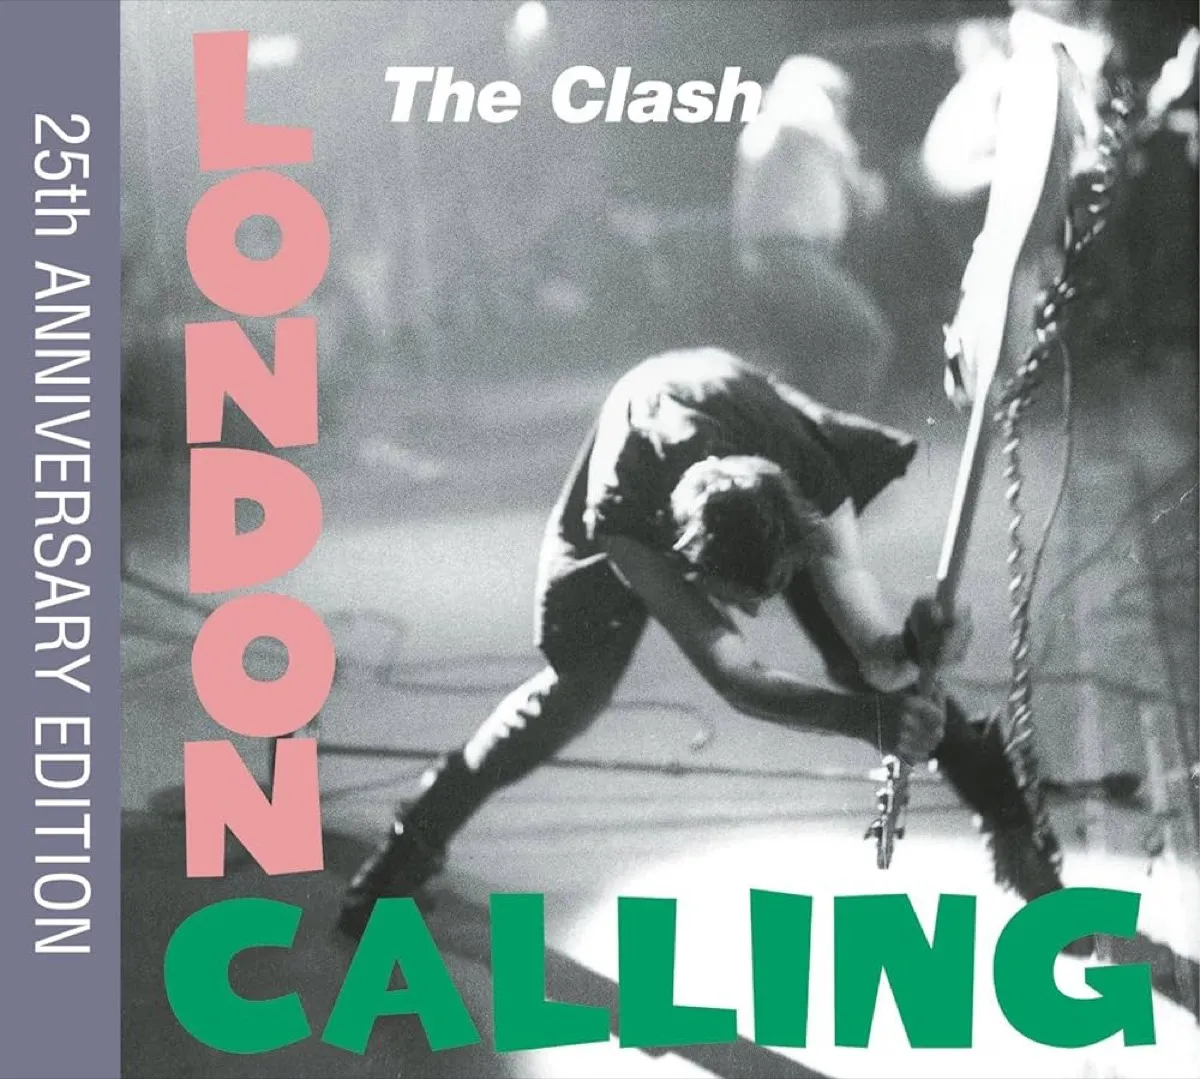 "London Calling: 25th Anniversary Edition" by The Clash album cover